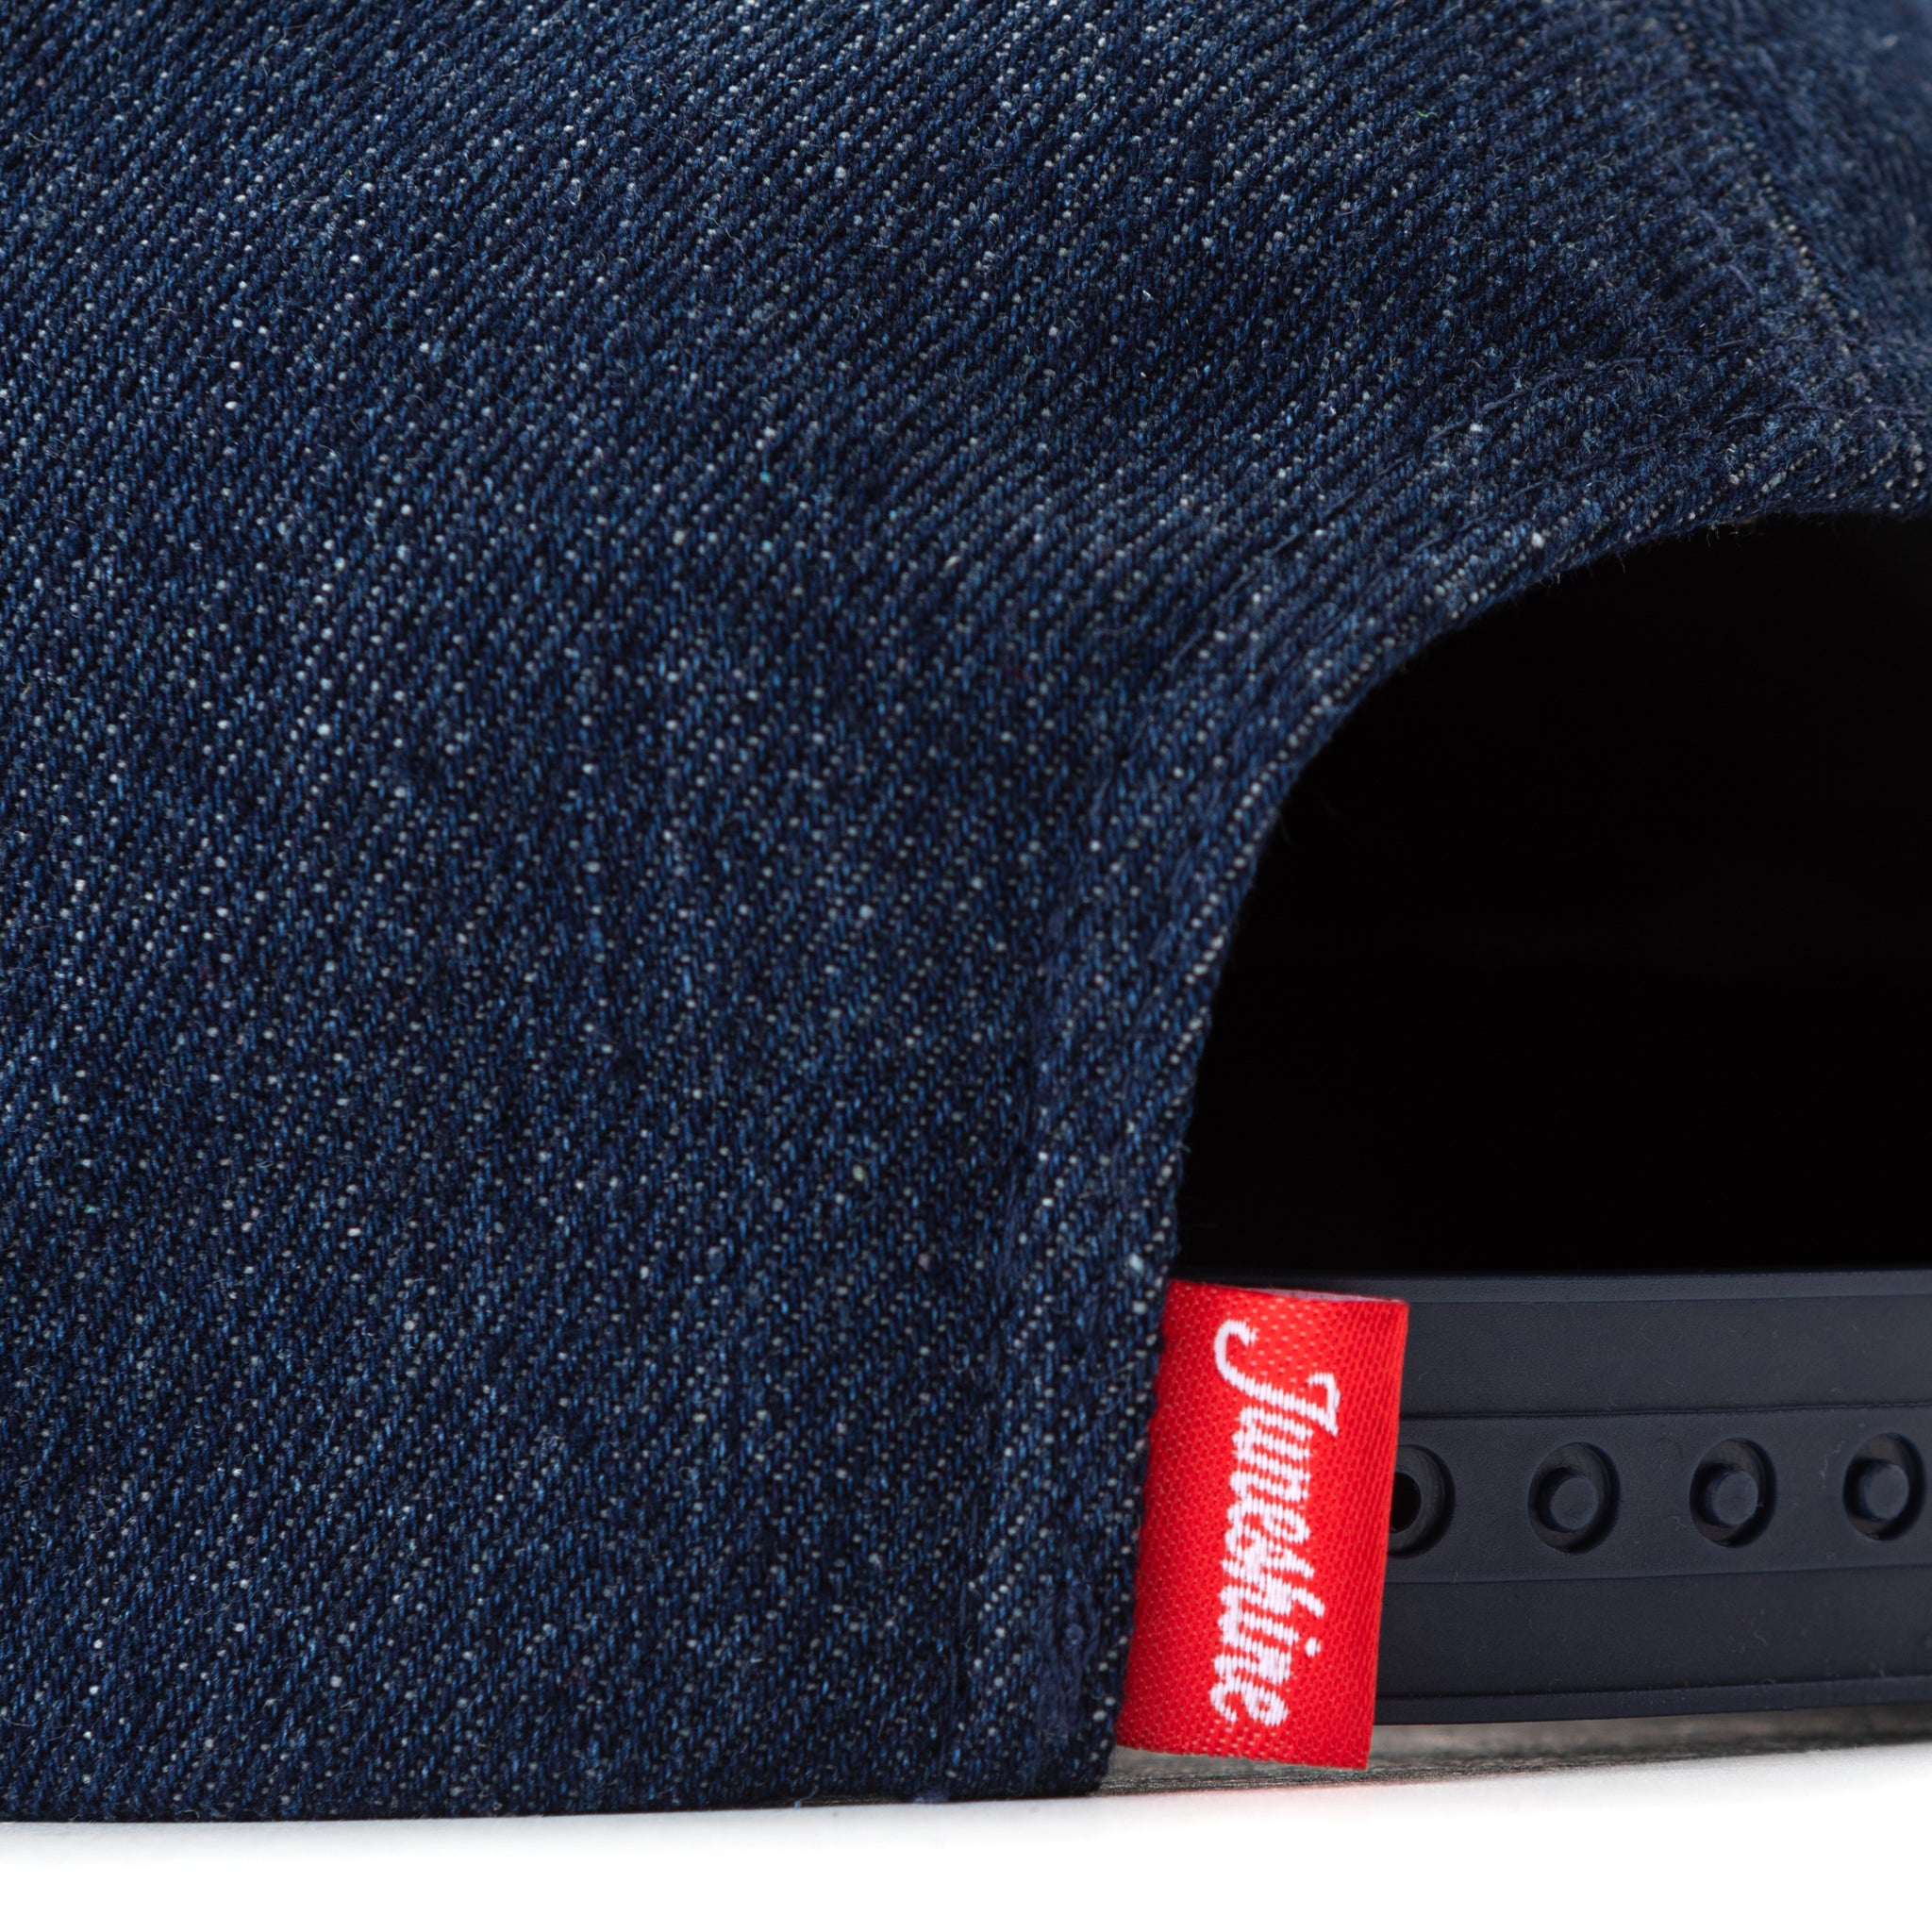 Detail of denim hat with red tag that reads JuneShine